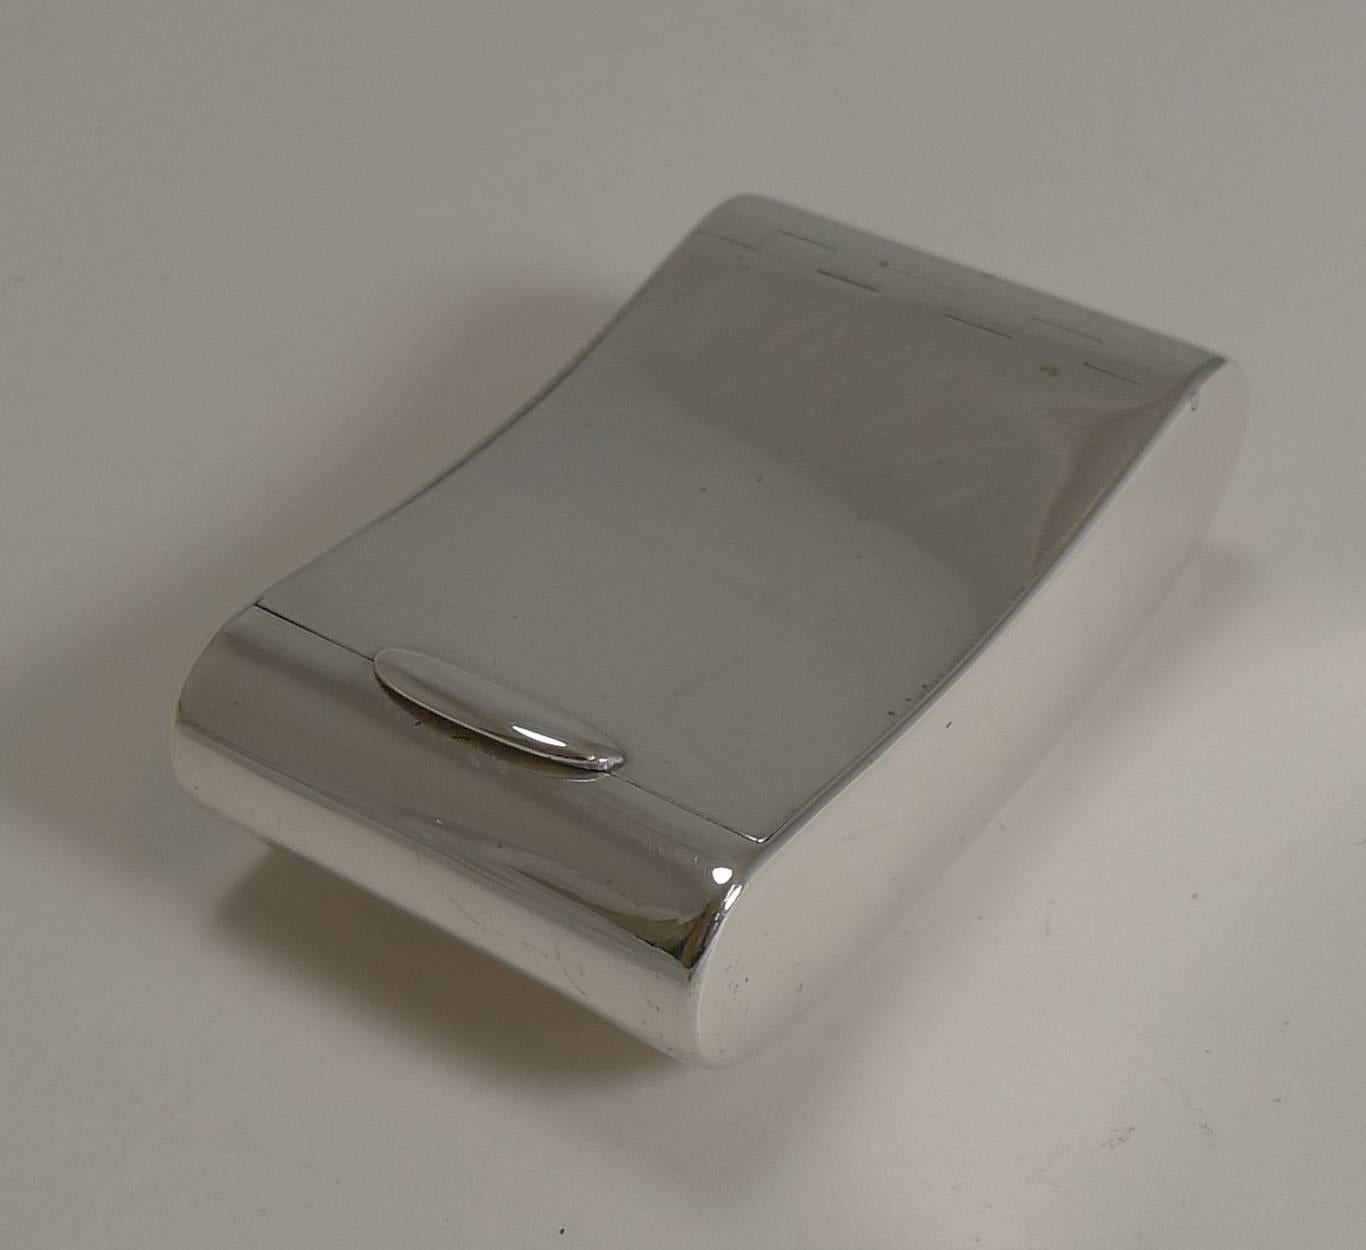 A very smart and very elegant kidney shaped vesta case or match striker made from a heavy gauge of English sterling silver.

The lid fits perfectly and the beautifully engineered flush hinge can be seen from the lid. Once the lid is opened, the